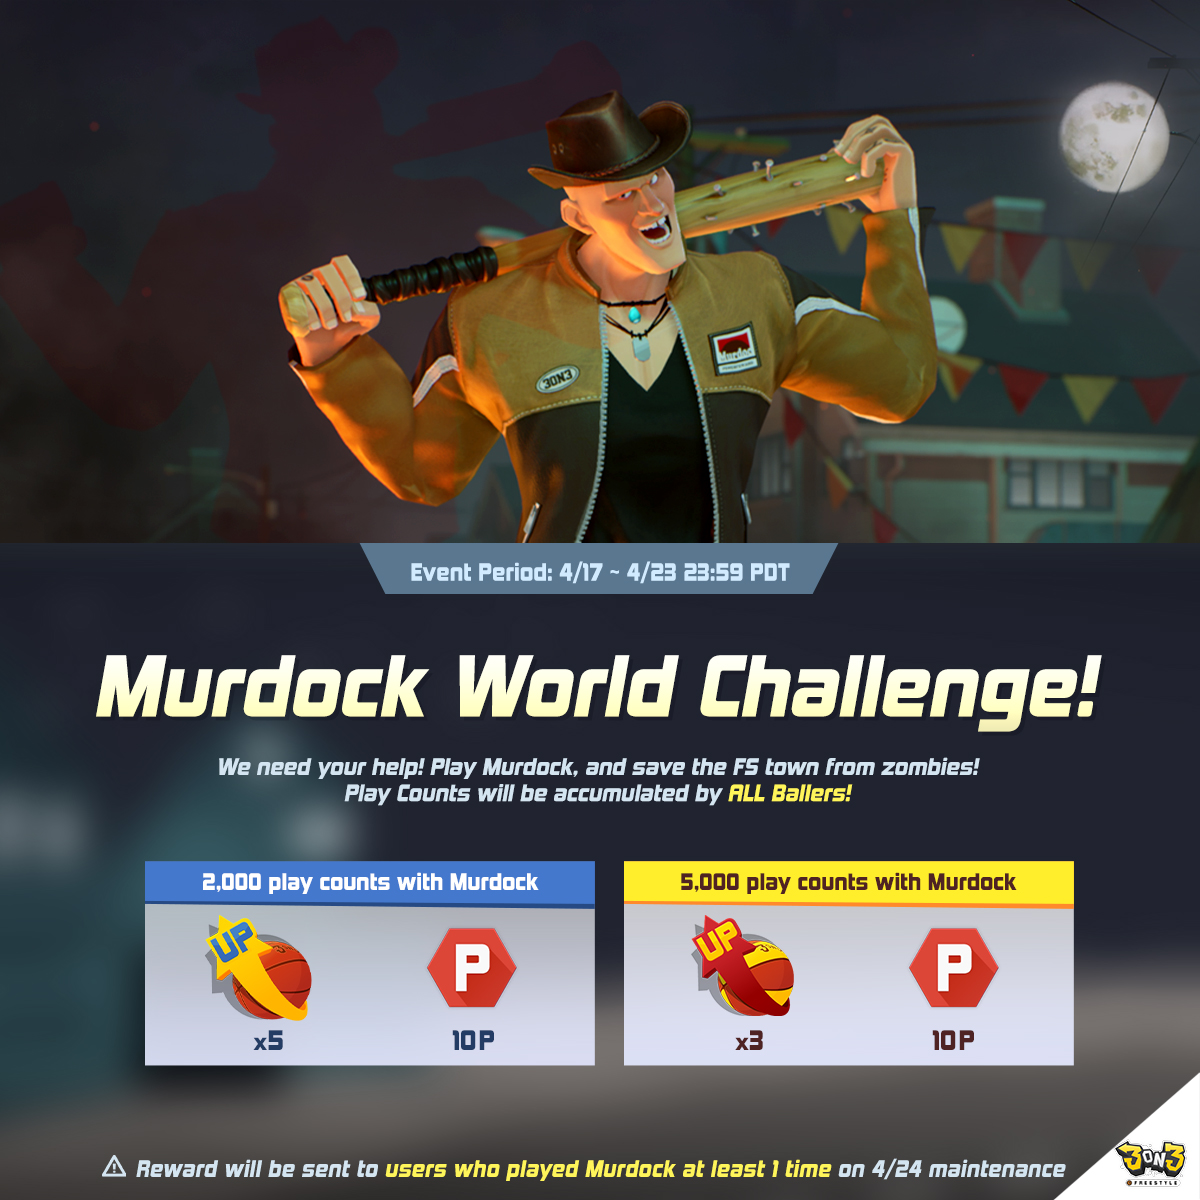 The ultimate battle for FS Town is here! Join the Murdock World Challenge and fight off the zombie invasion! Play Murdock to save the day, and every play counts towards victory! 

Hurry, event ends 04/23! 

#videogame #StreetBasketball #3on3freestyle